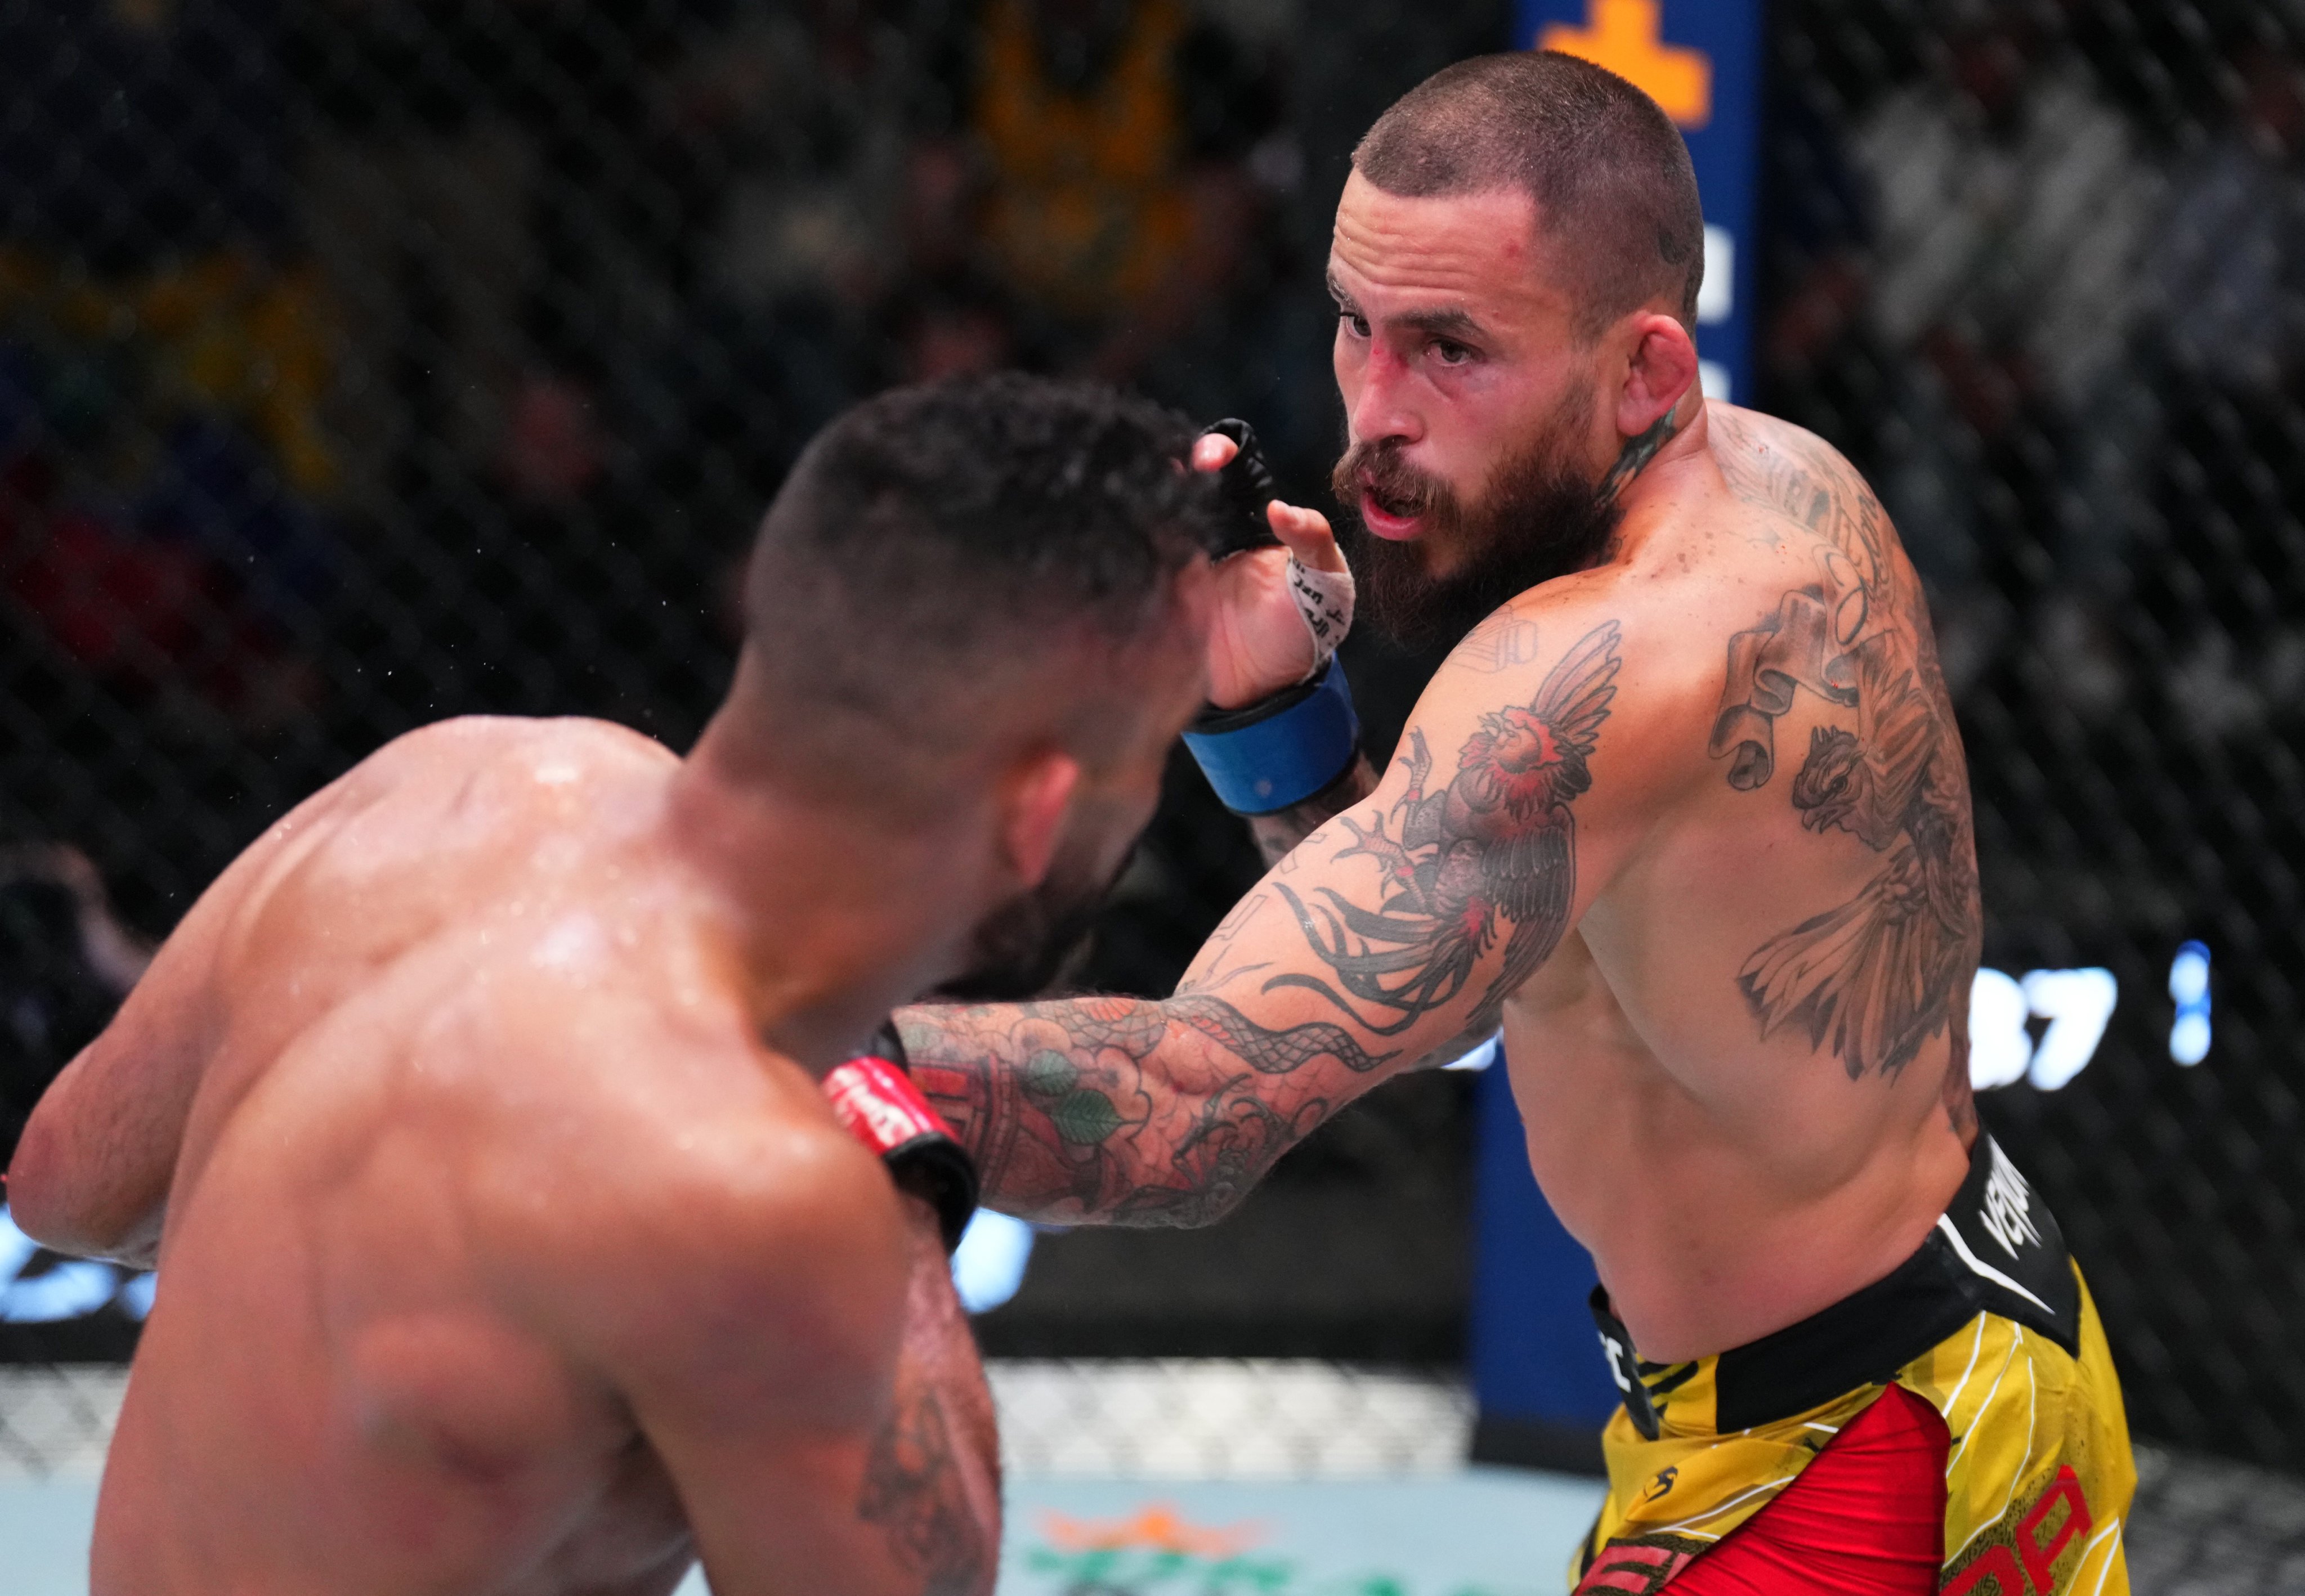 Marlon Vera (right) punches Rob Font in a bantamweight fight during the UFC Fight Night event at UFC Apex on April 30, 2022 in Las Vegas, Nevada. Photo: Chris Unger/Zuffa LLC